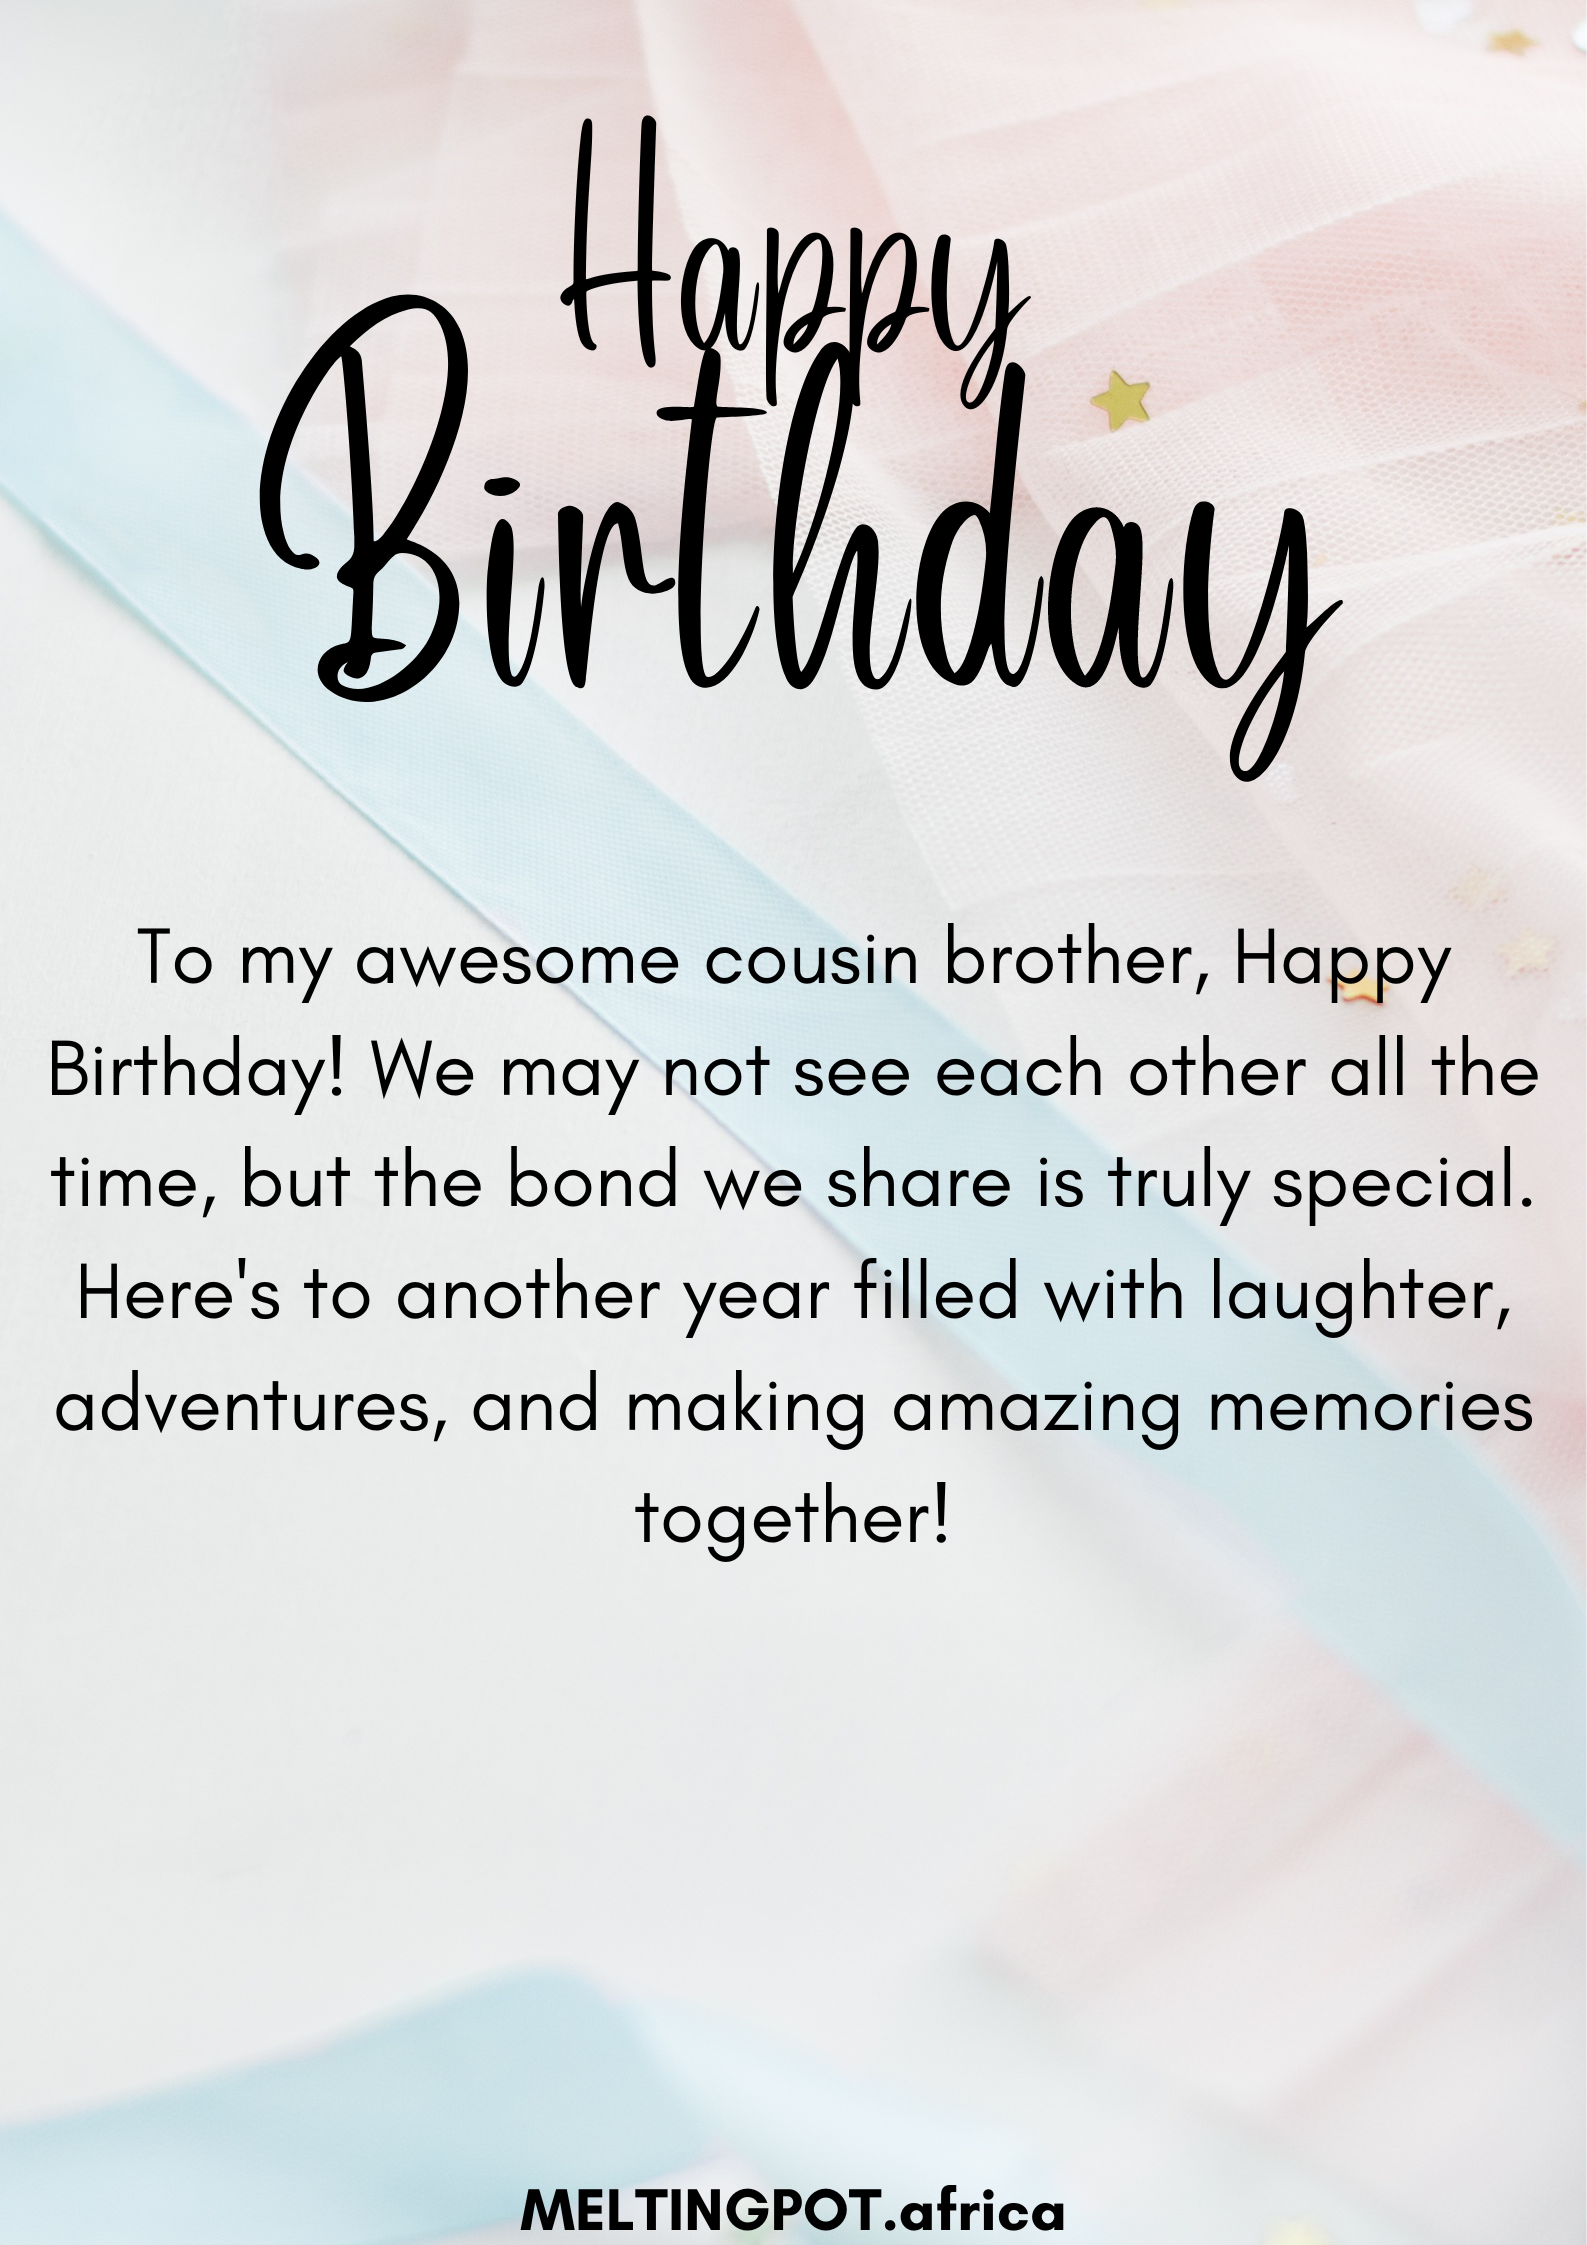 Sending warm birthday wishes to your cousin brother, a cherished family member and friend. Here are heartfelt messages to celebrate his special day and the bond you share. 